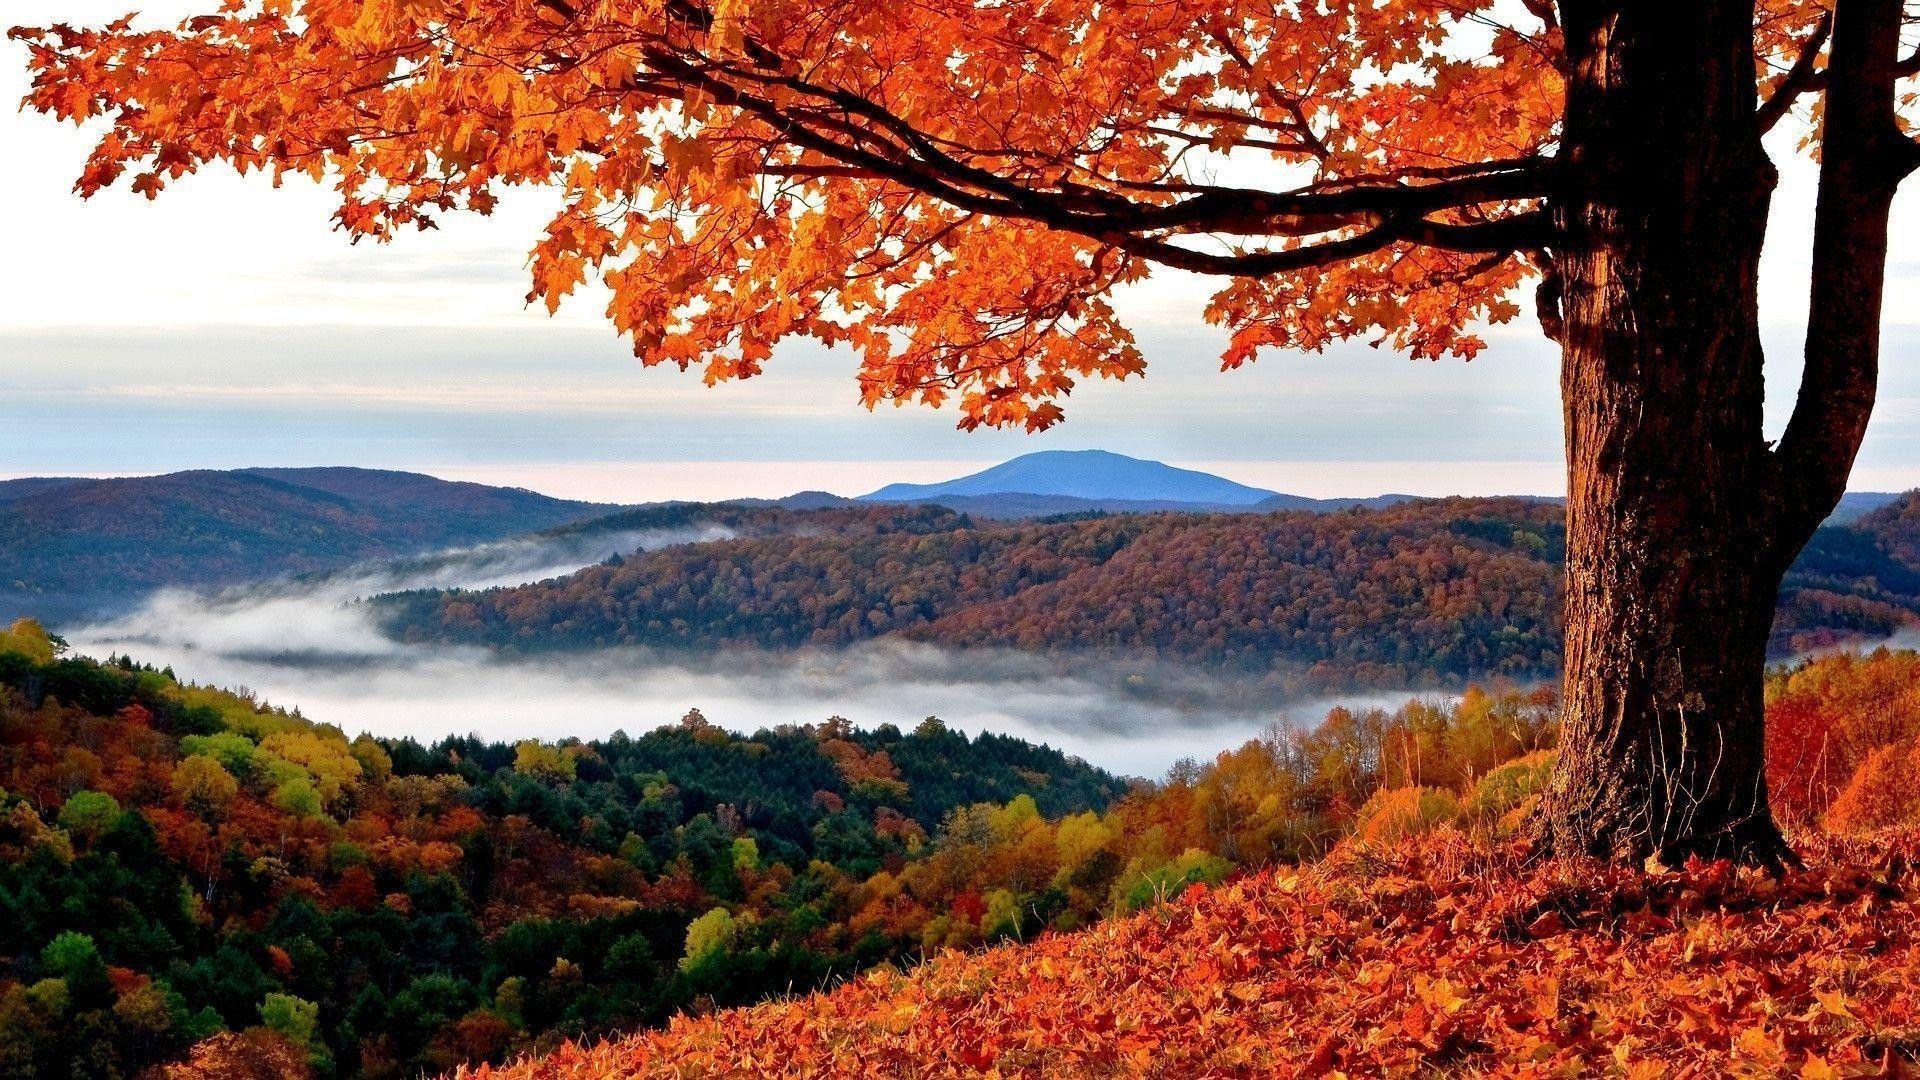 New England Autumn Wallpapers Top Free New England Autumn Backgrounds